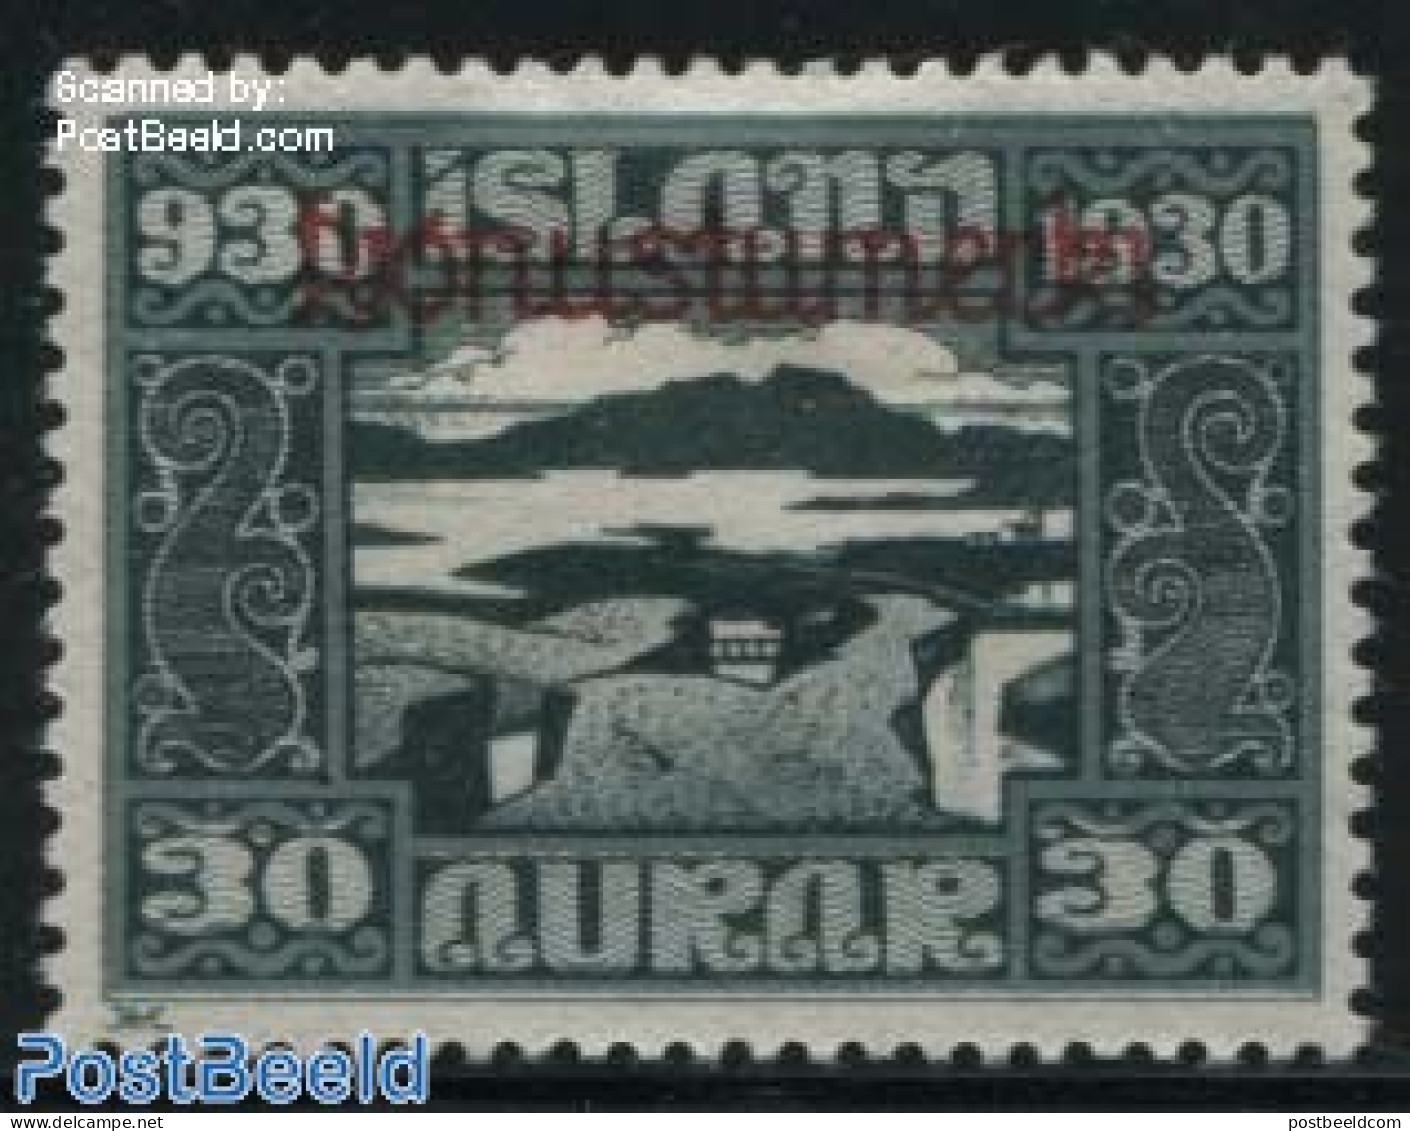 Iceland 1930 30A, Stamp Out Of Set, Unused (hinged) - Nuovi